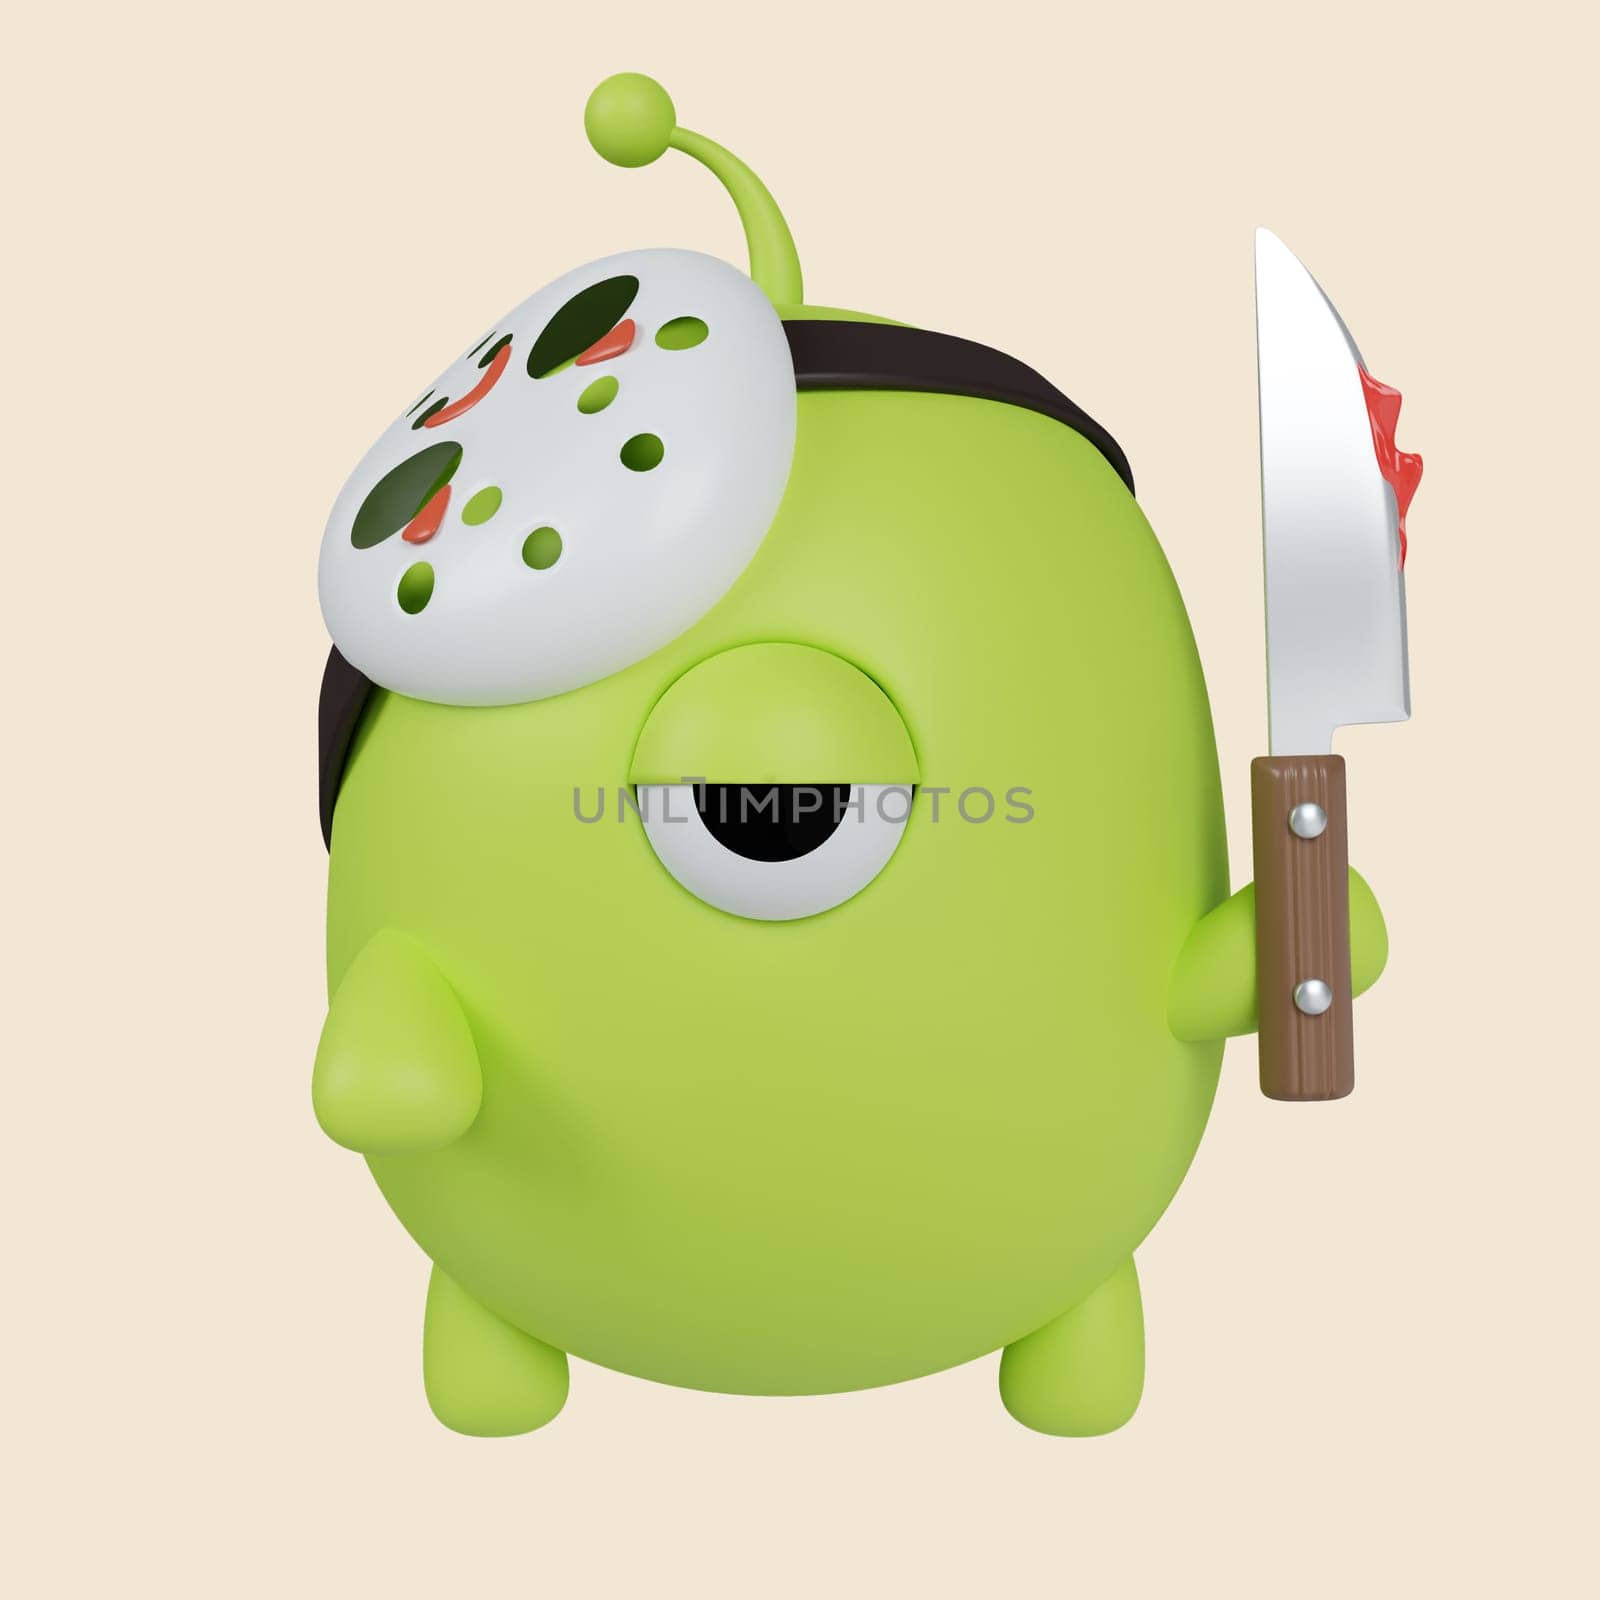 3d Halloween green monster holding a knife icon. Traditional element of decor for Halloween. icon isolated on gray background. 3d rendering illustration. Clipping path..